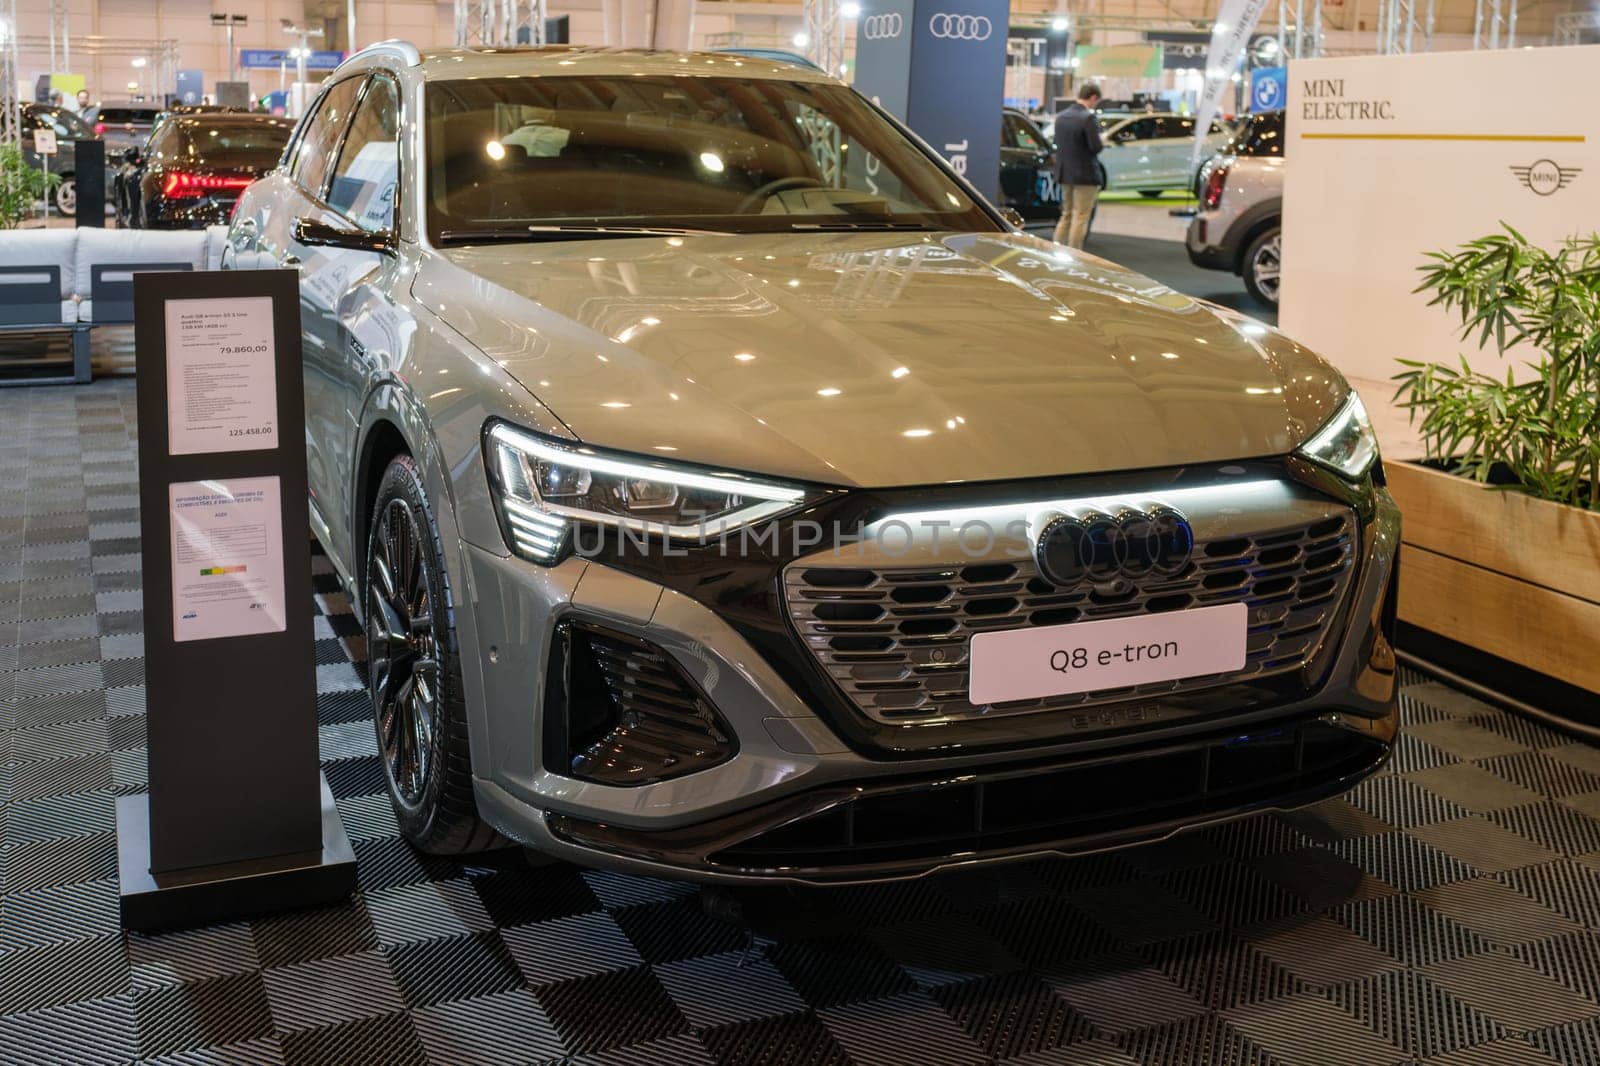 Audi Q8 e-tron electric car at ECAR SHOW - Hybrid and Electric Motor Show by dimol